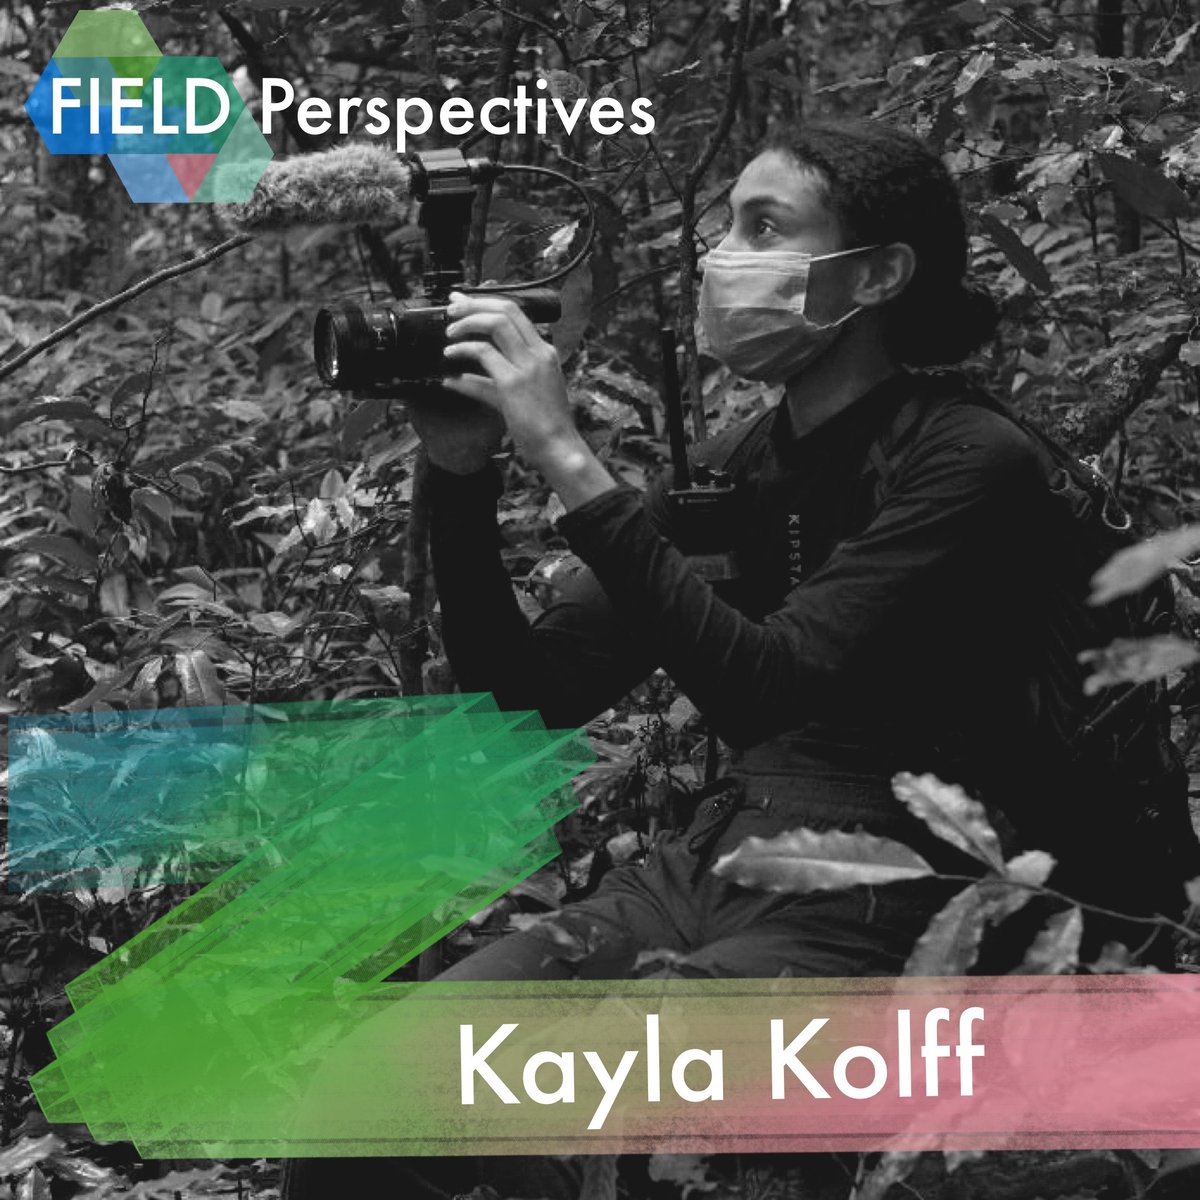 At #fieldperspectives @KaylaKolff discusses recontextualising identity with fieldwork 💫fieldperspectives.org/KaylaKolff.html '[My advice is to] go into the field open-minded with little expectations and to try to enjoy the experience to the fullest despite the hardships one may encounter.'